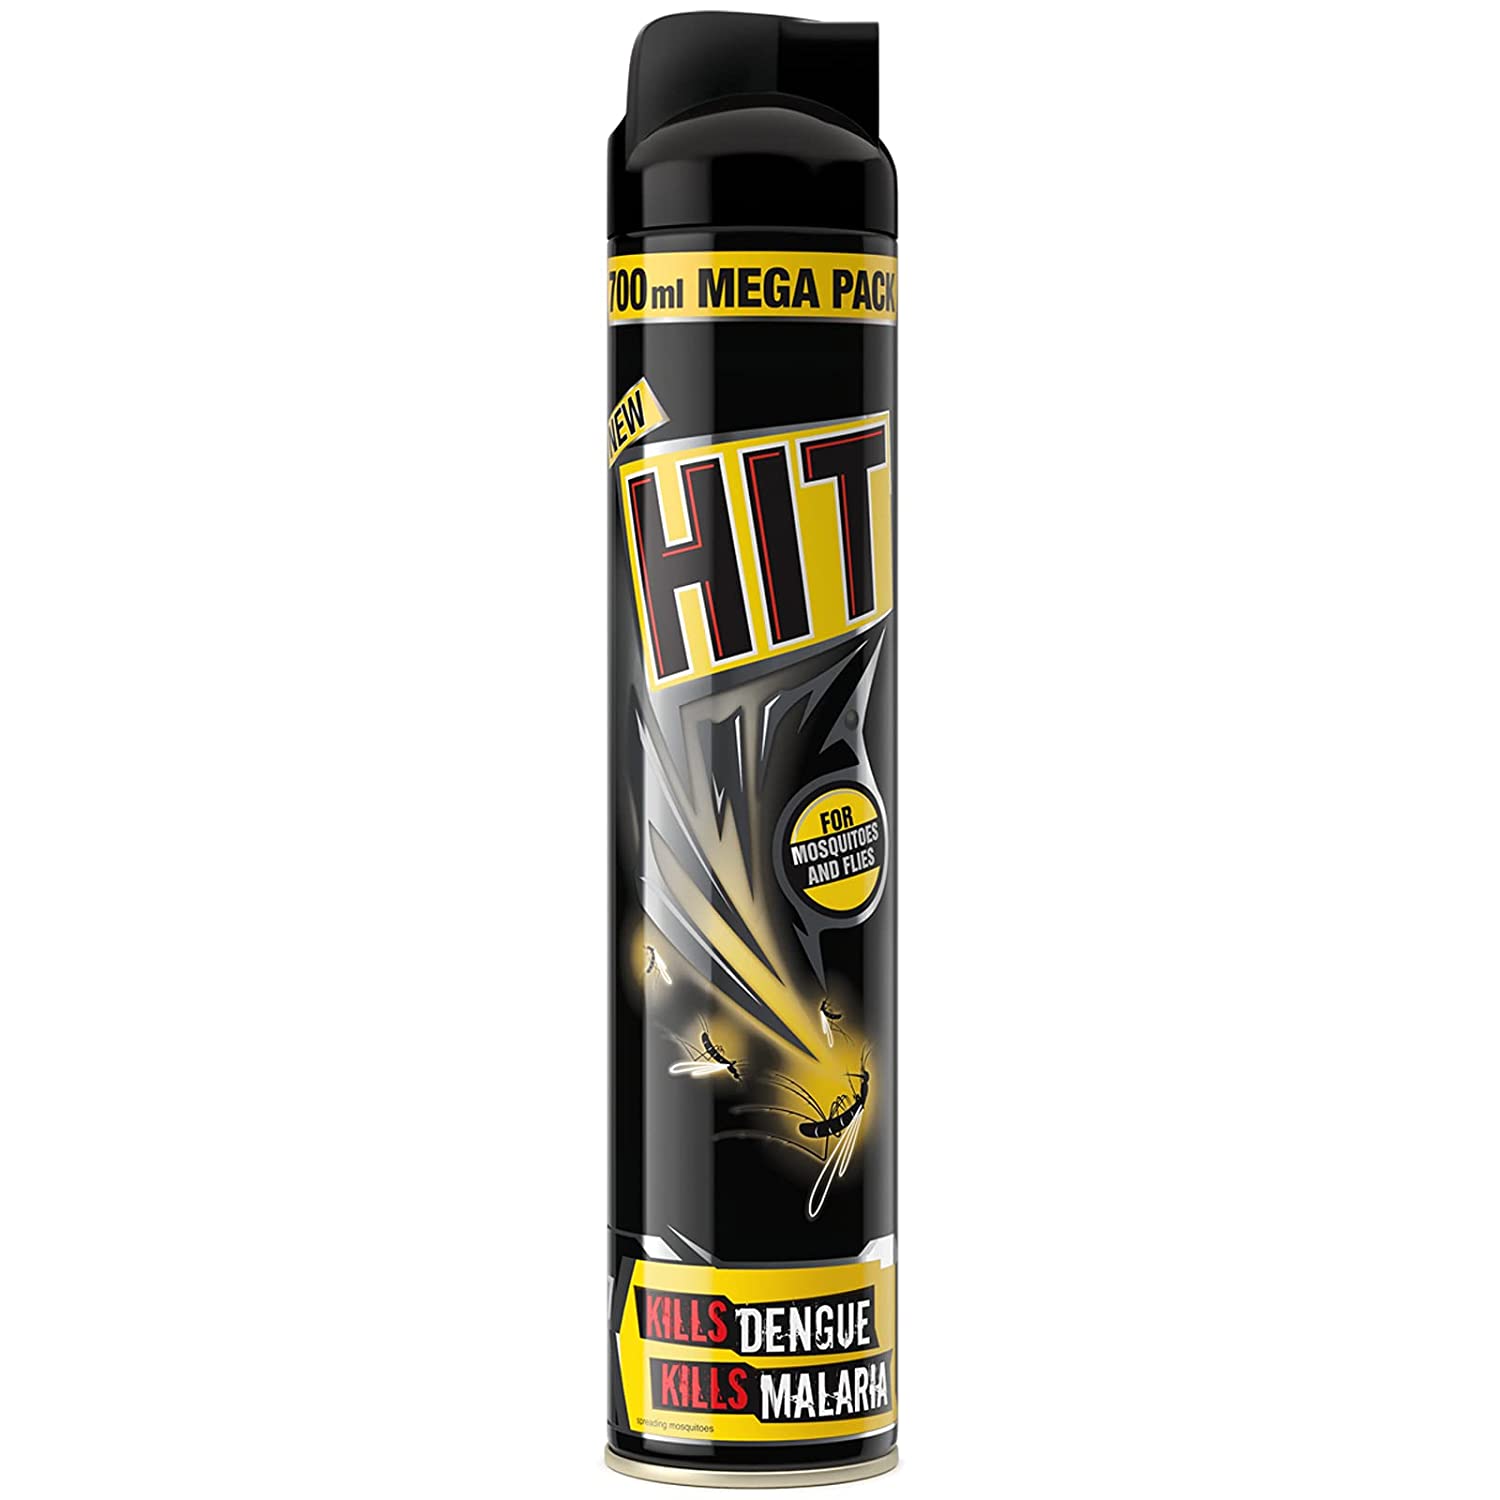 HIT Flying Insect Killer - Mosquito & Fly Killer Spray, Instant Kill, (700ml), HIT Flying Insect Killer 